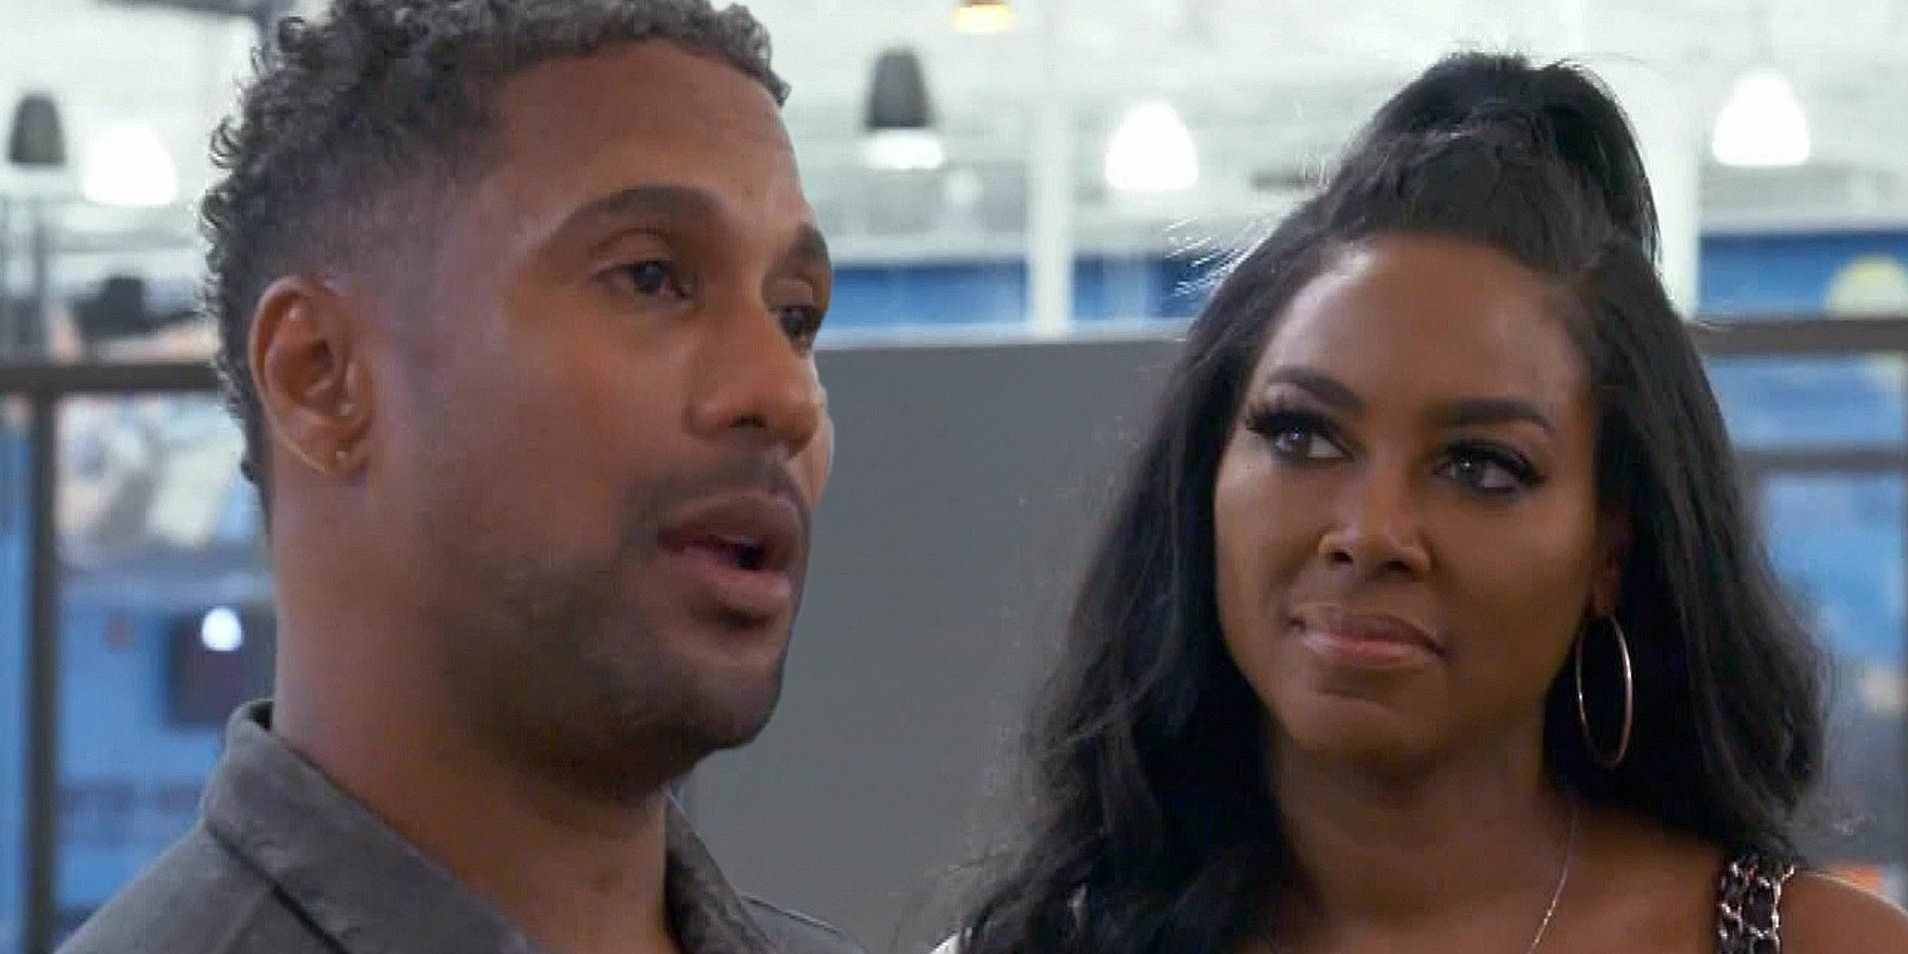 Kenya looks at Marc while he talks to someone off-screen in Real Housewives of Atlanta